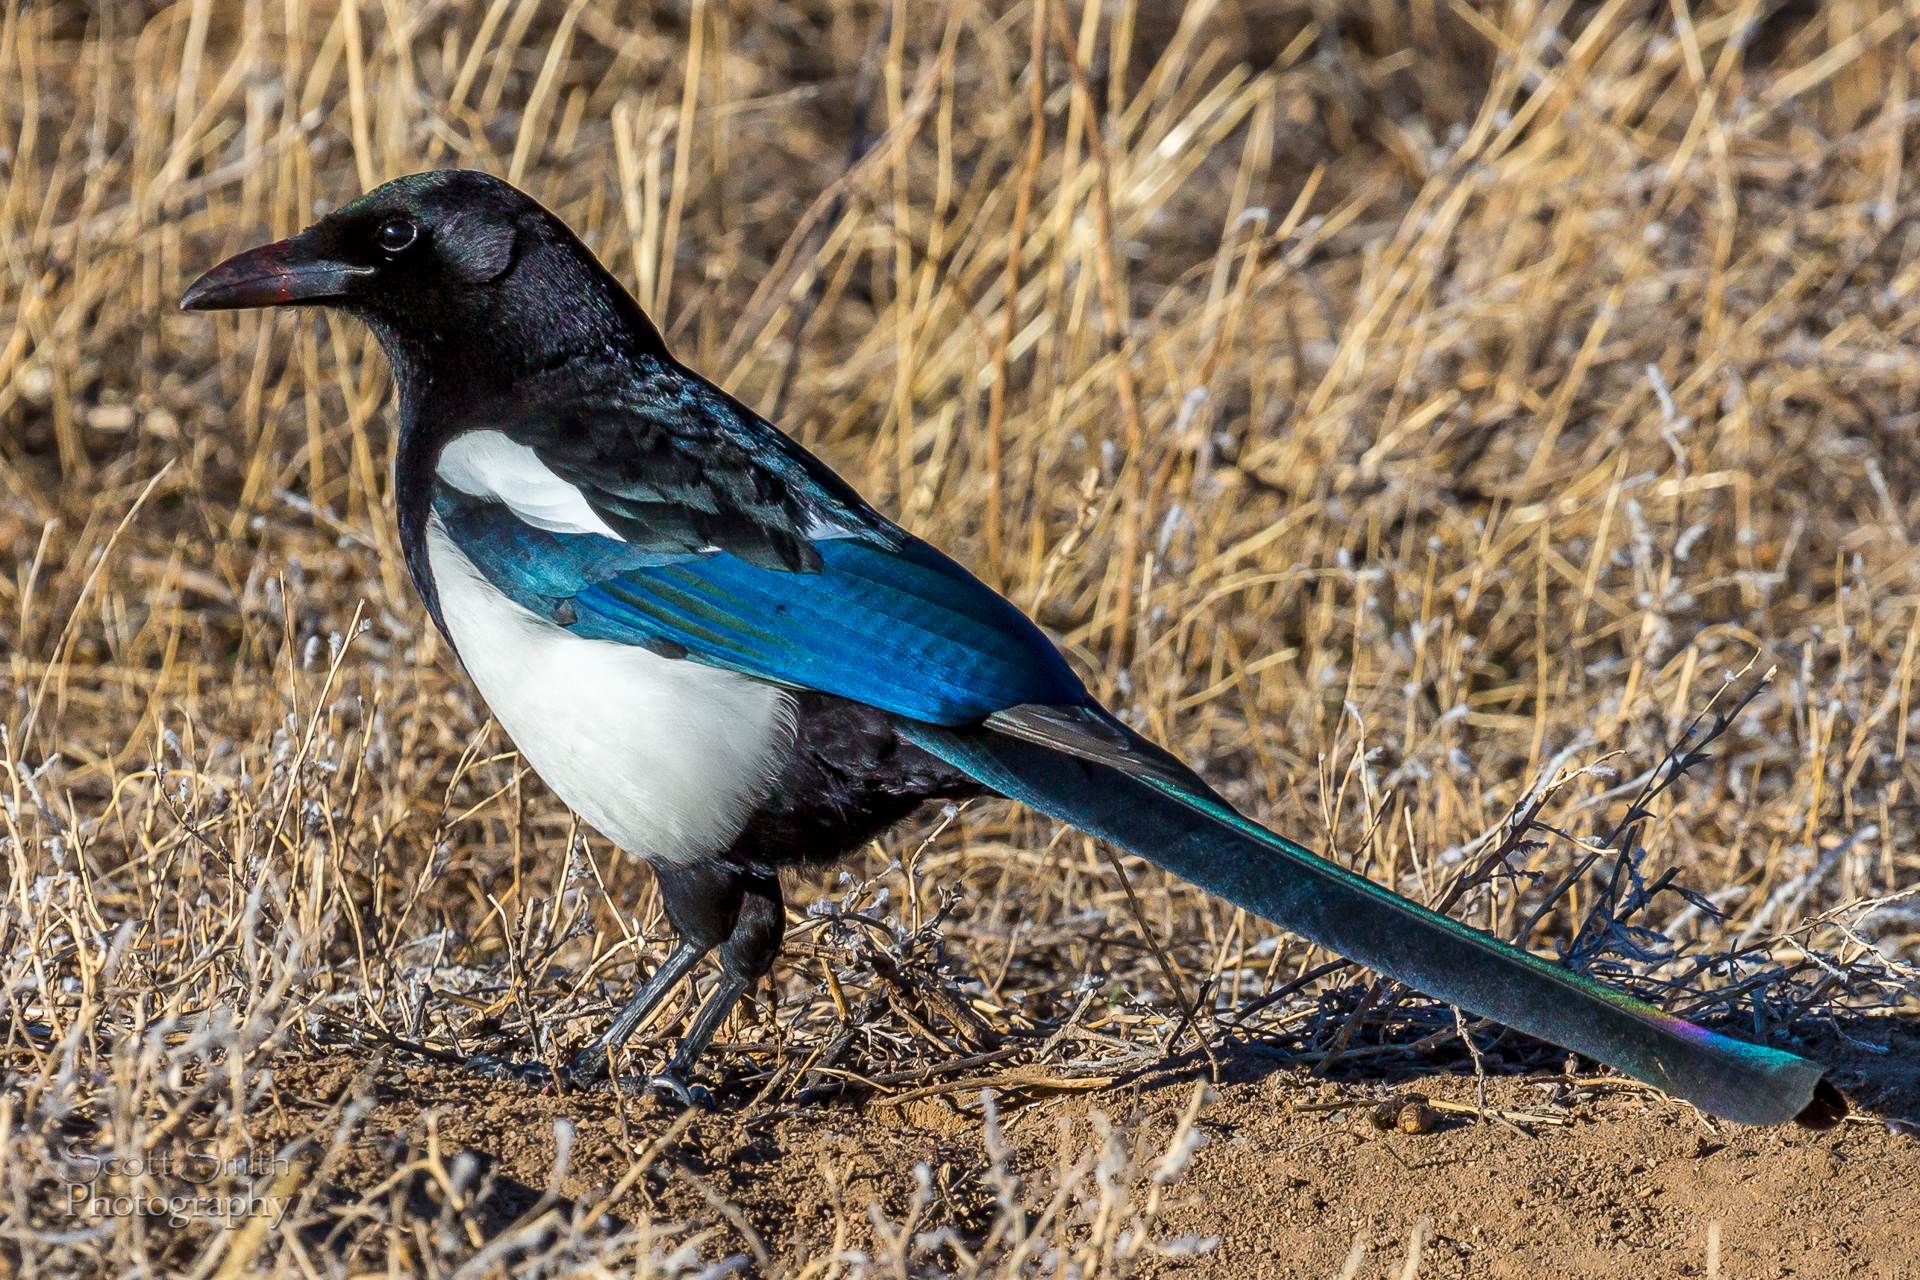 Magpie - A magpie enjoying some carrion at the Rocky Mountain Arsenal Wildlife Refuge. by Scott Smith Photos